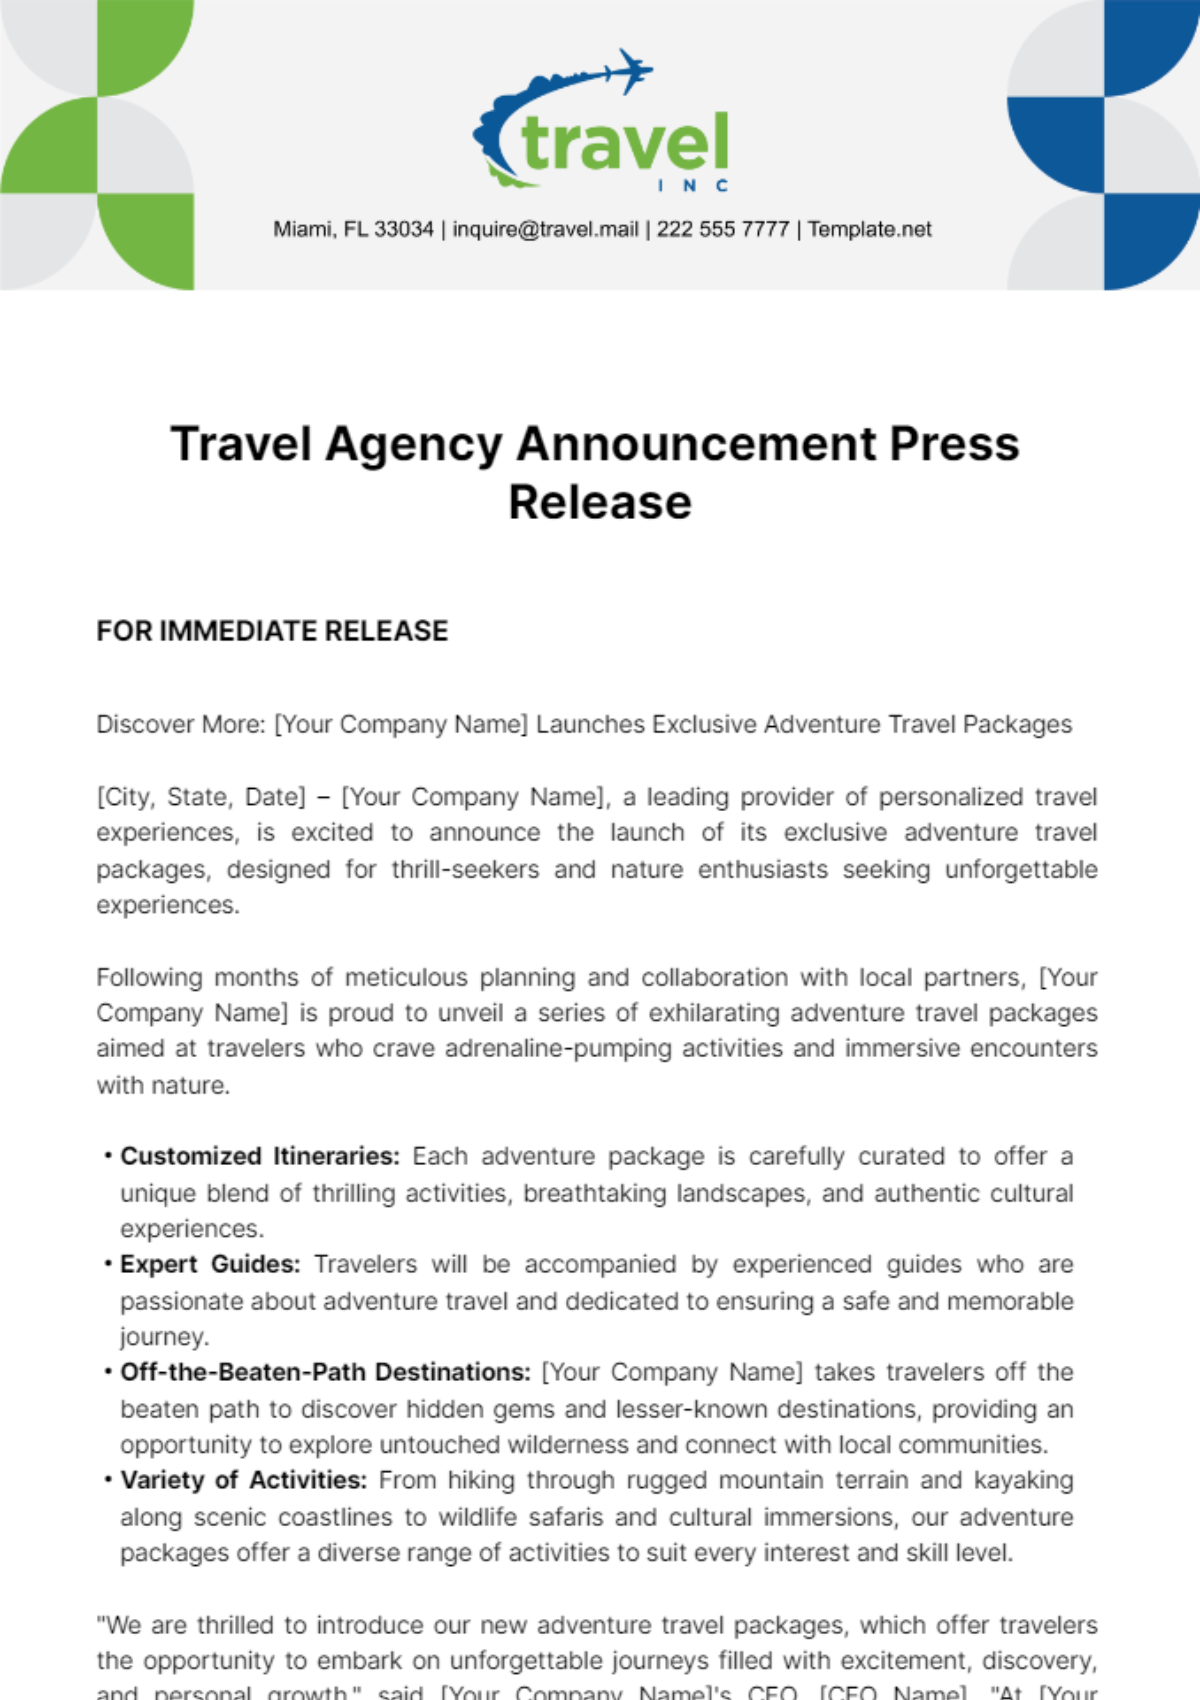 Travel Agency Announcement Press Release Template